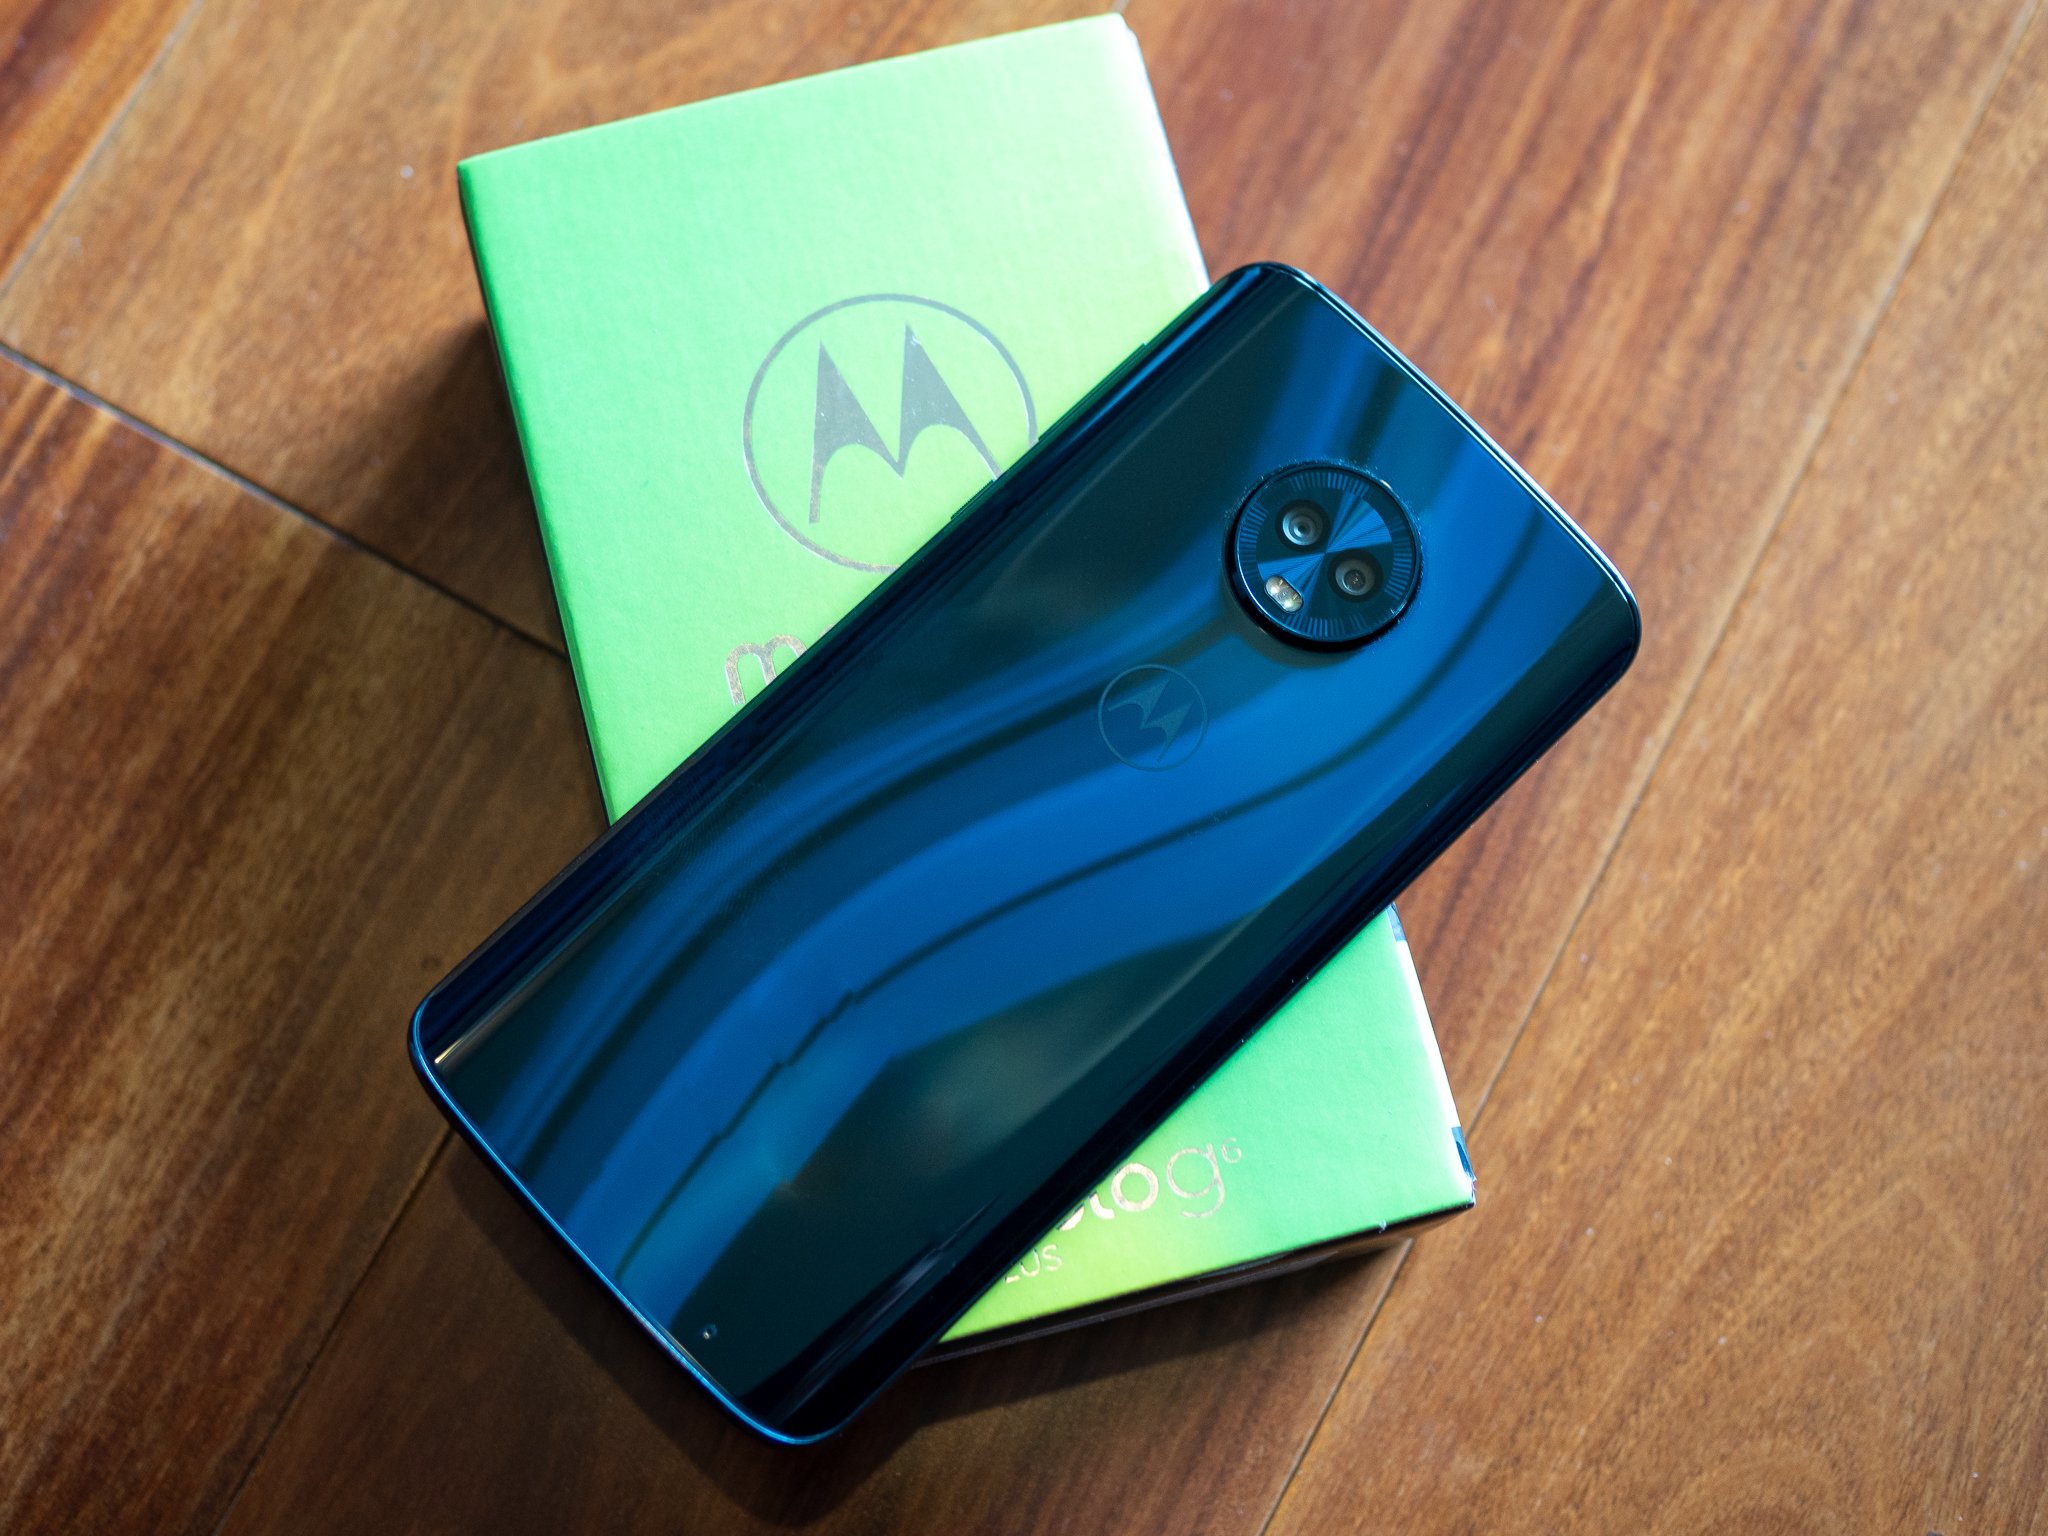 These are all the Moto phones Motorola is releasing in 2018